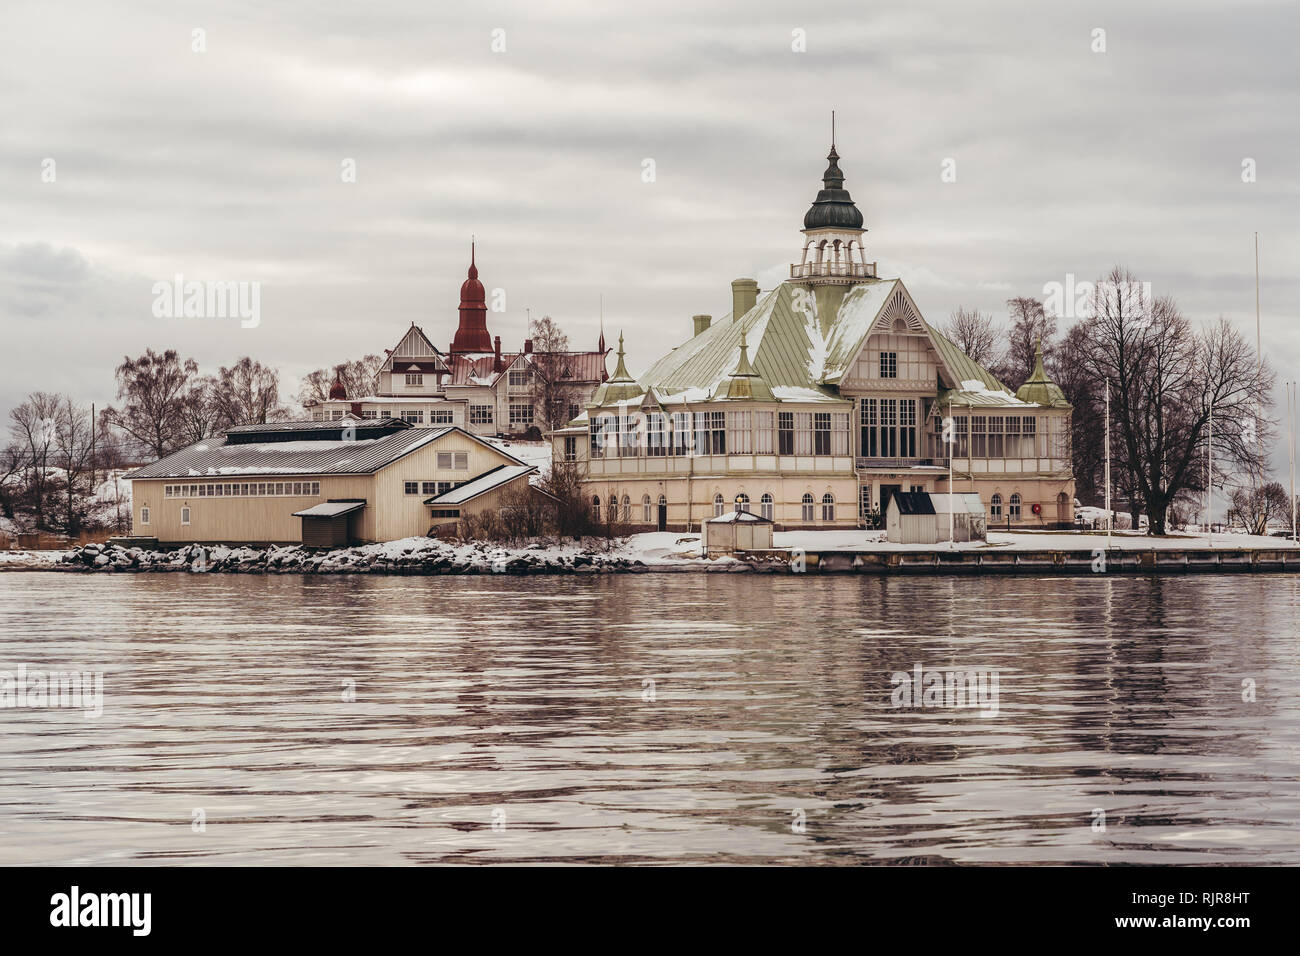 Club house of a boat club outside Helsinki Finland on a small island formation on a winter day Stock Photo